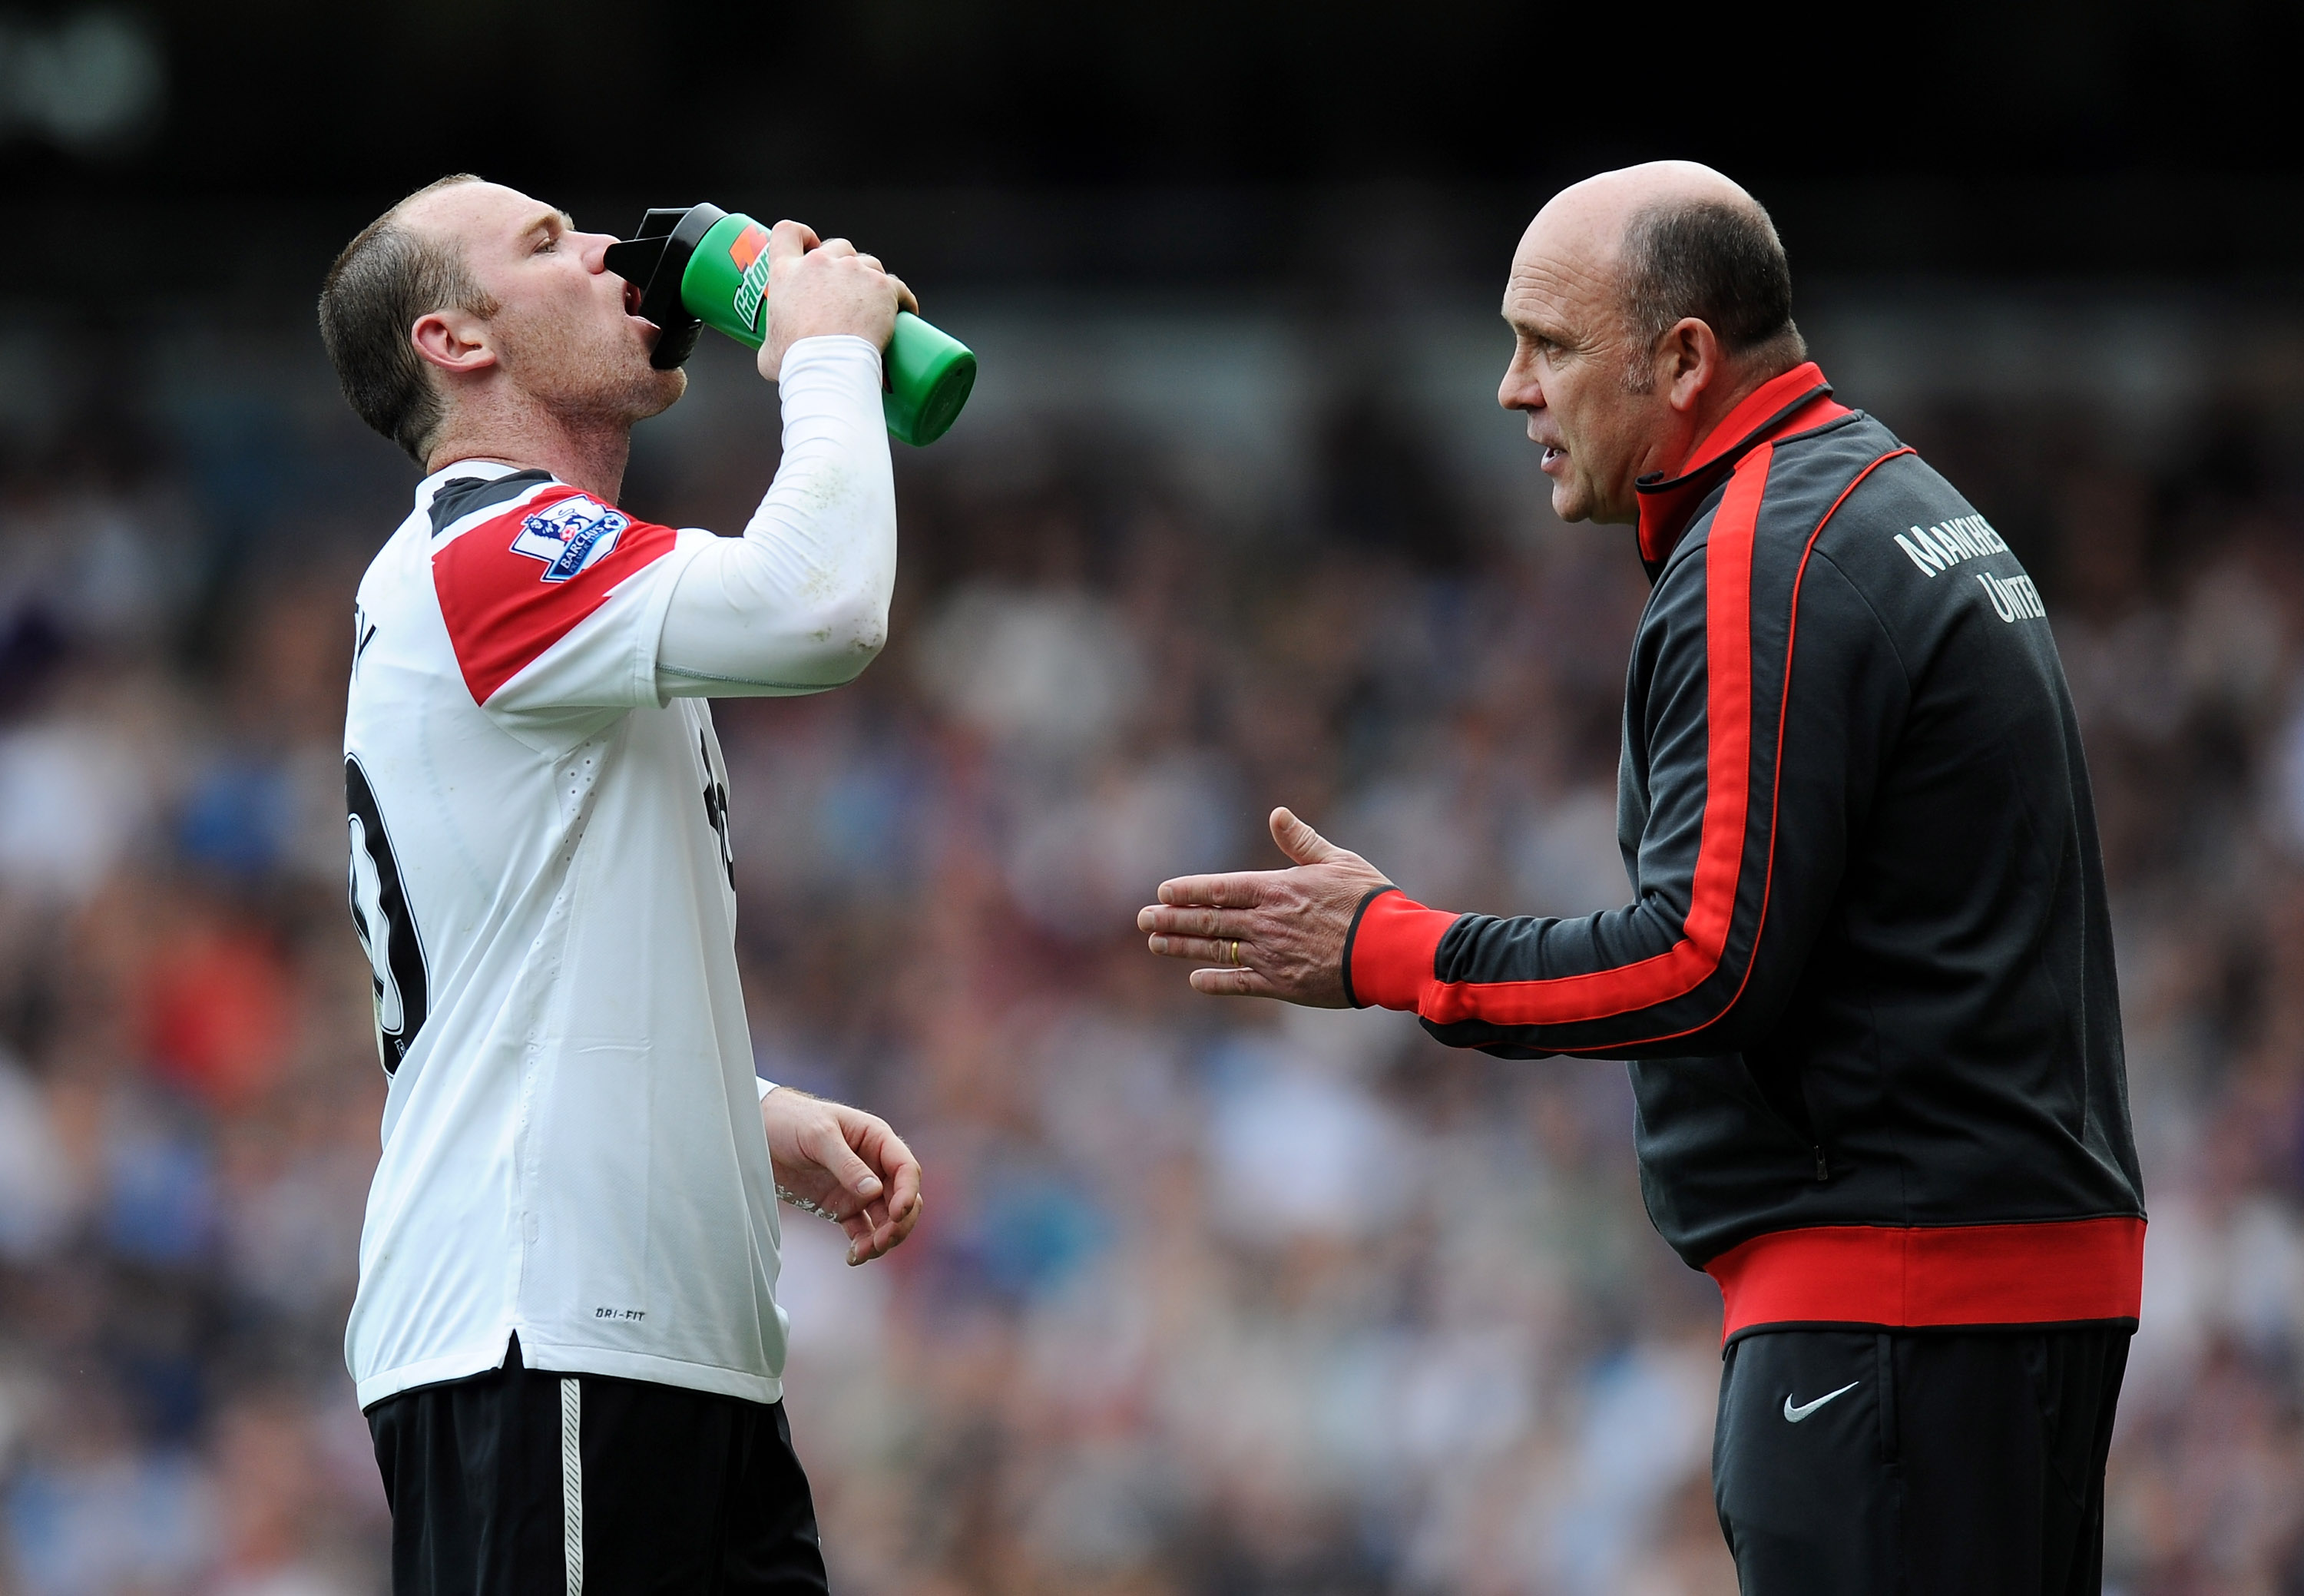 LONDON, ENGLAND - APRIL 02:  Manchester United assistant Mike Phelan talks to Wayne Rooney during the Barclays Premier League match between West Ham United and Manchester United at the Boleyn Ground on April 2, 2011 in London, England.  (Photo by Mike Hew